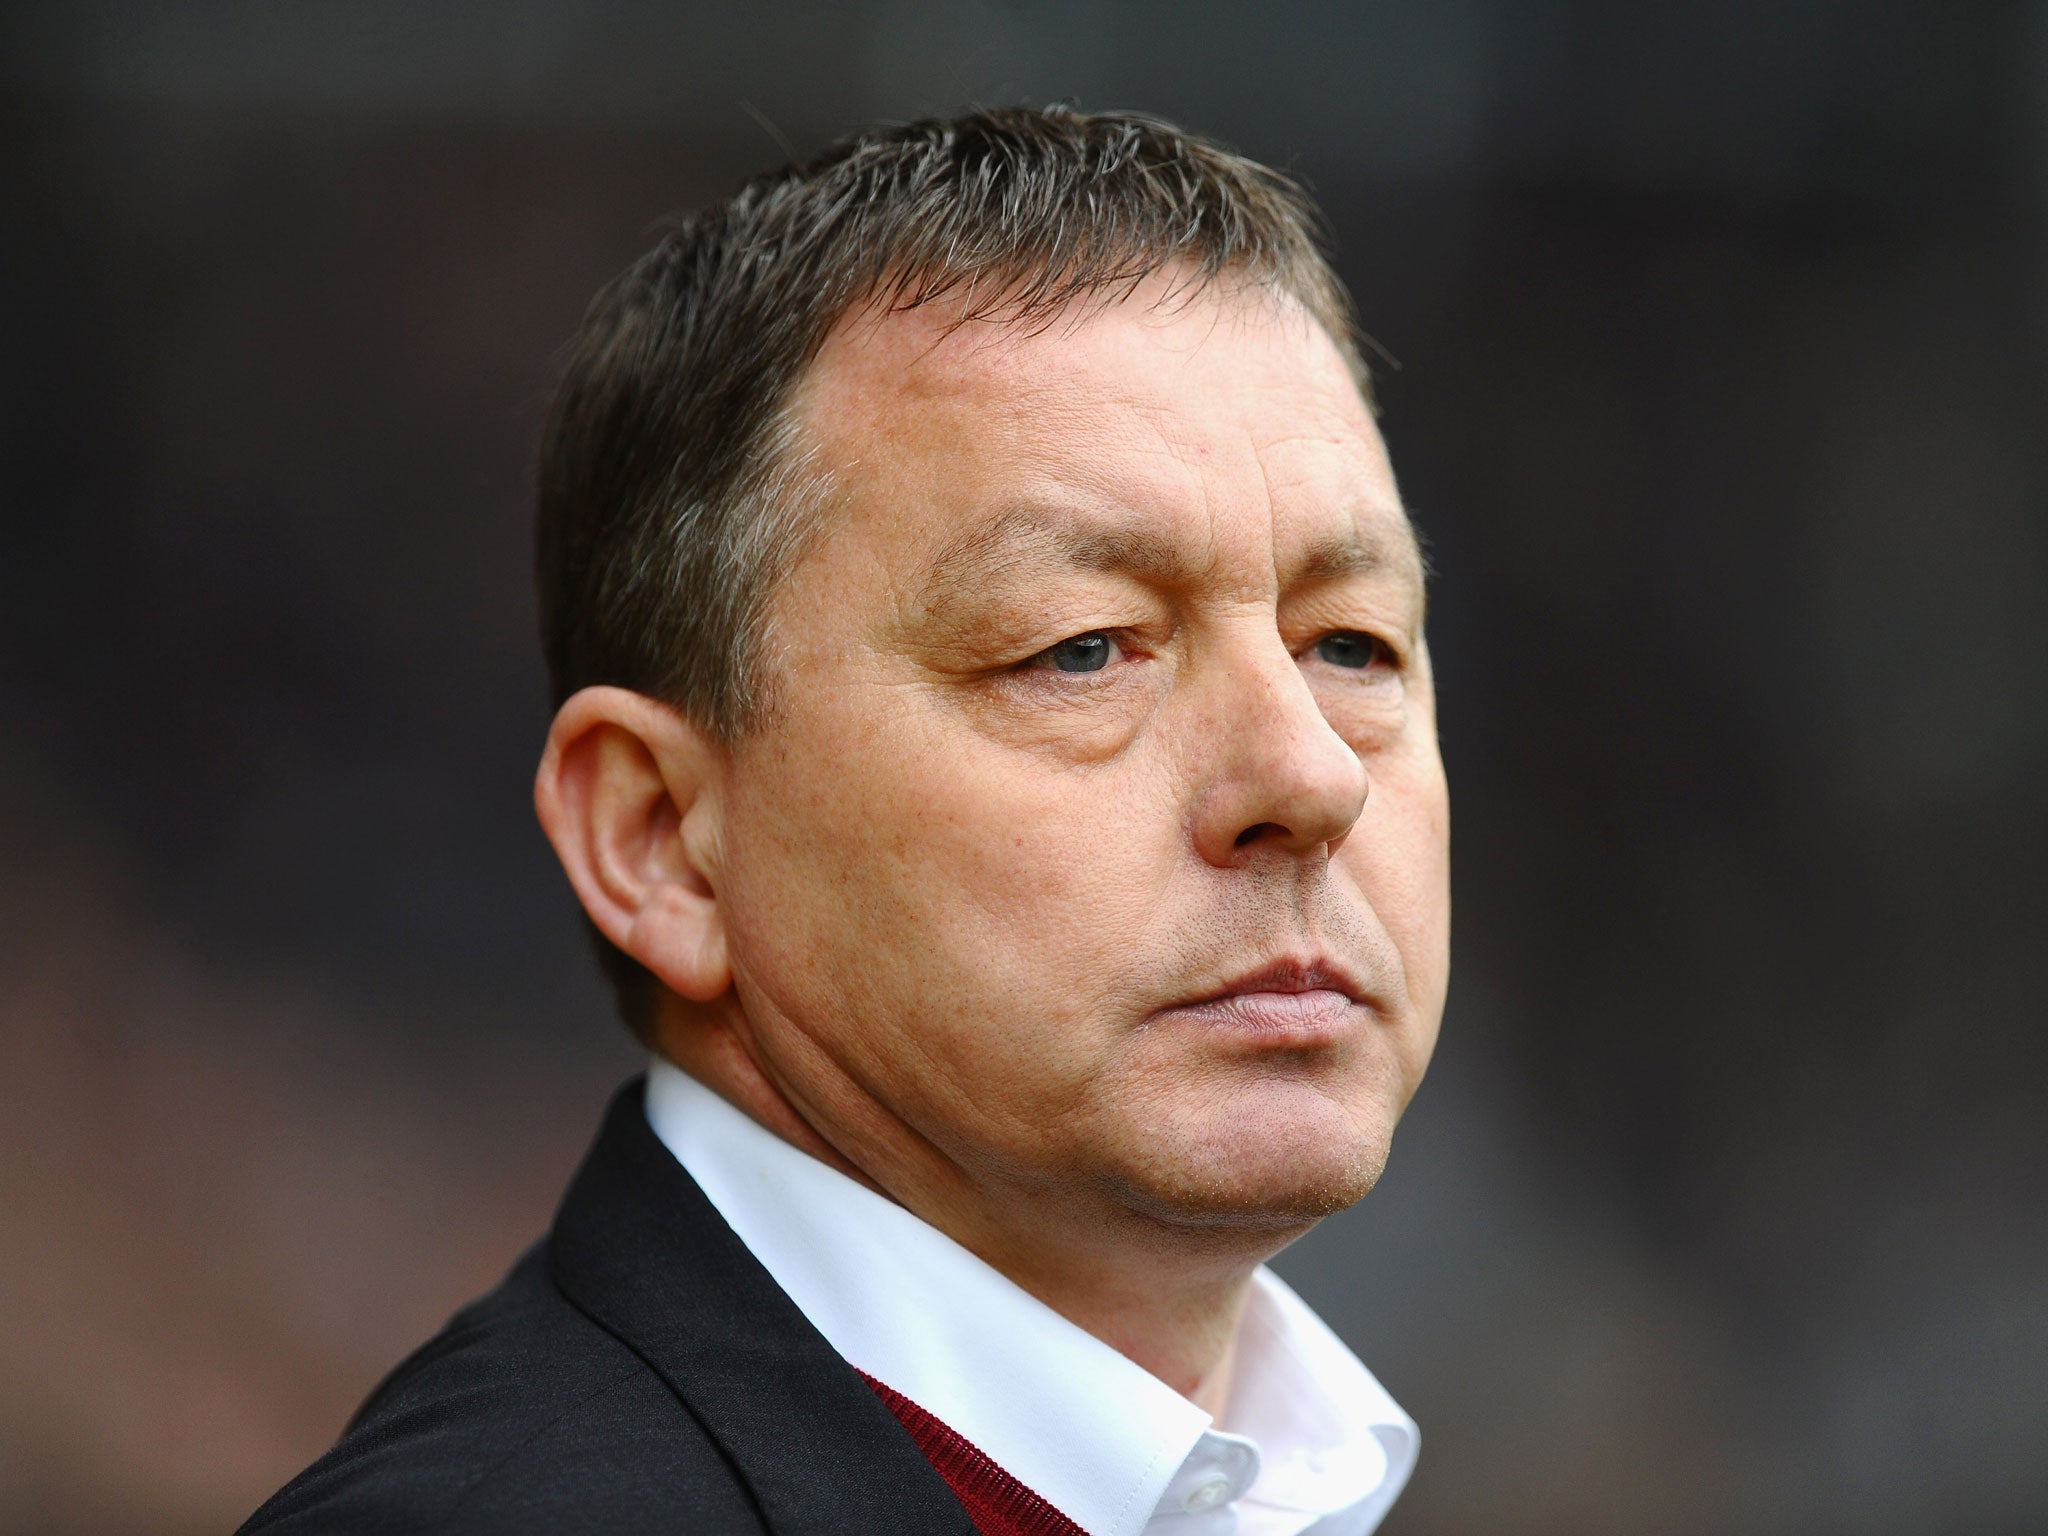 Nottingham Forest are expected to confirm that Billy Davies has been sacked after 13 months at the City Ground